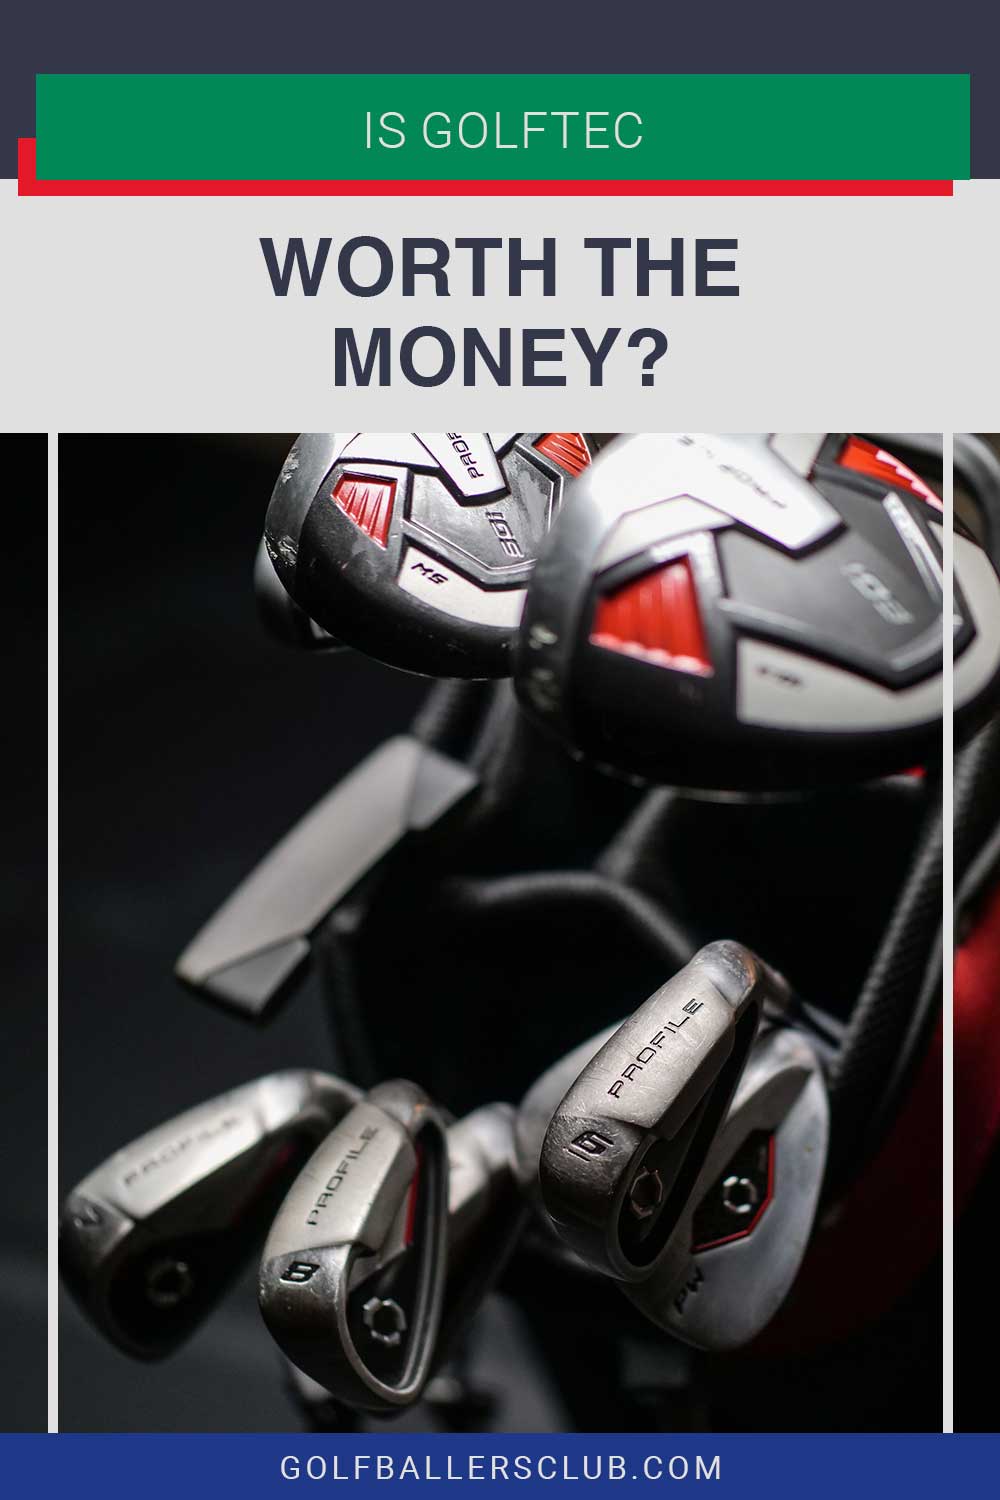 Some golf drivers in a bag - Is GOLFTEC Worth The Money?